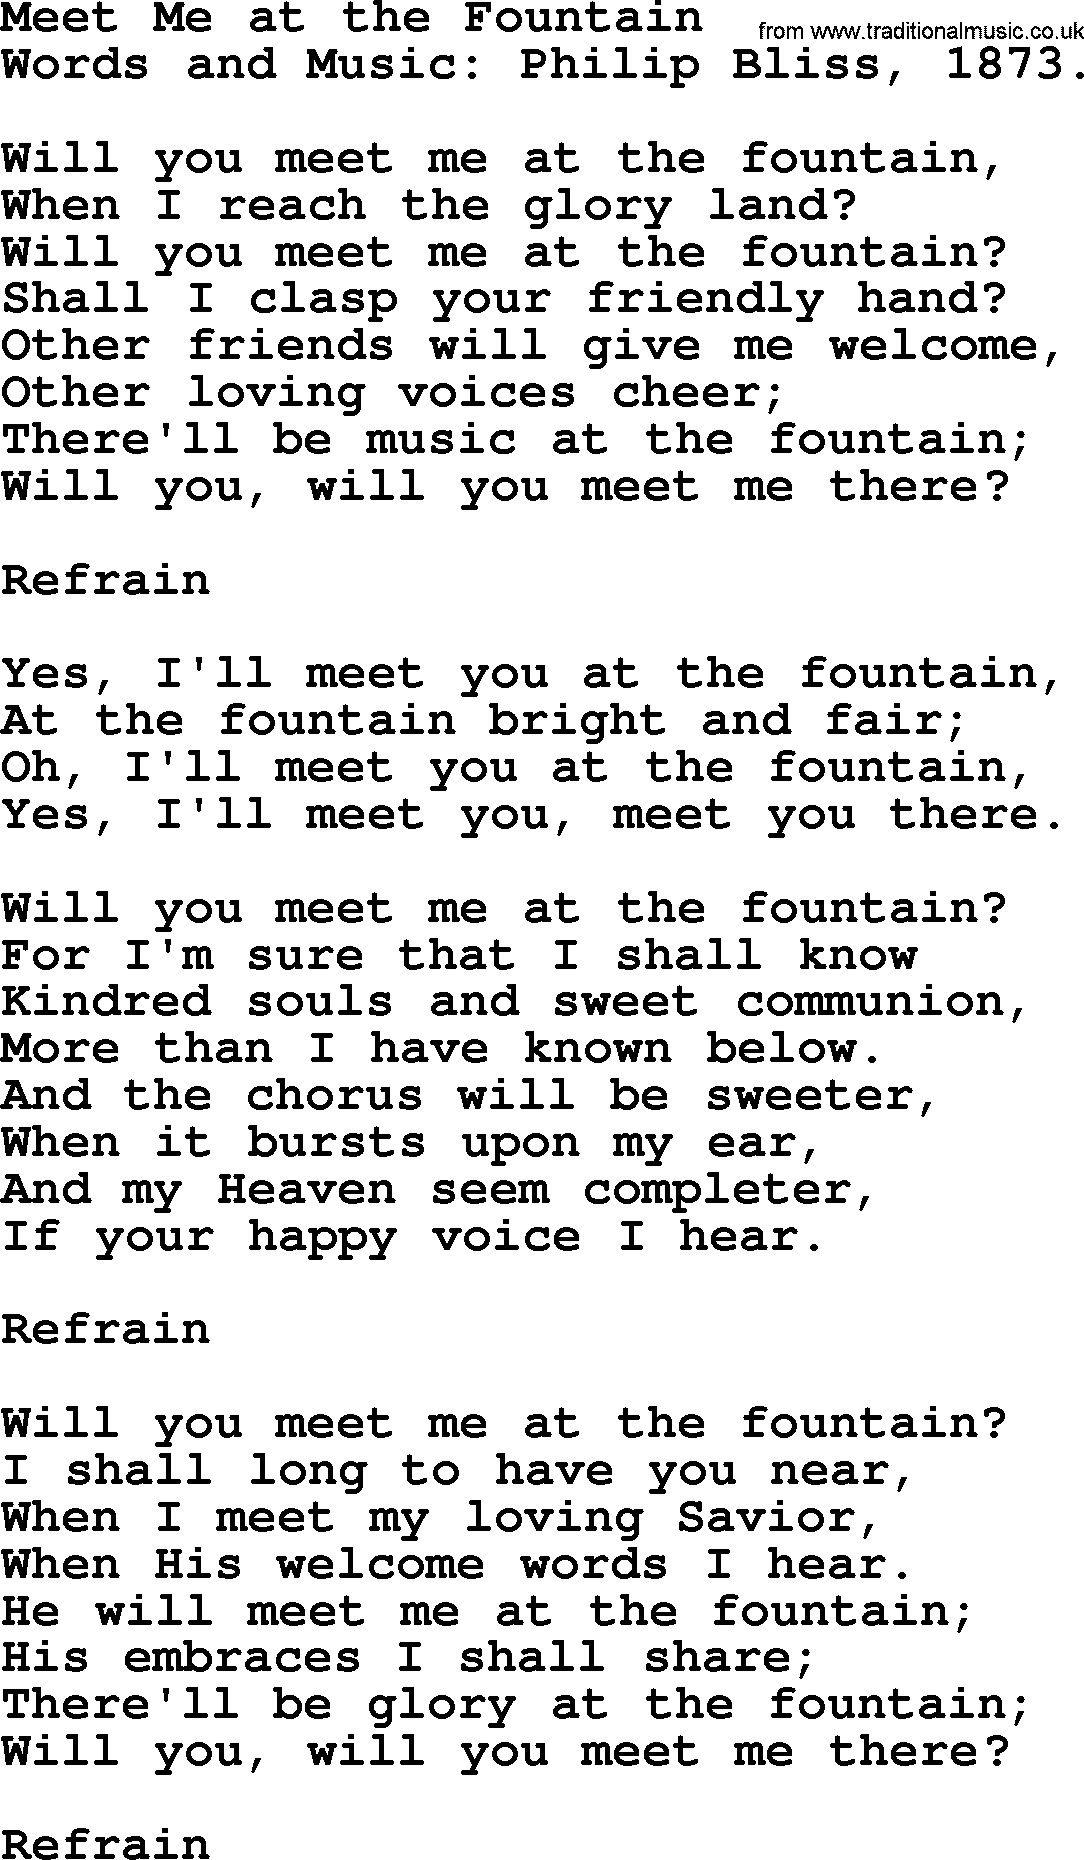 Songs and Hymns about Heaven: Meet Me At The Fountain lyrics with PDF